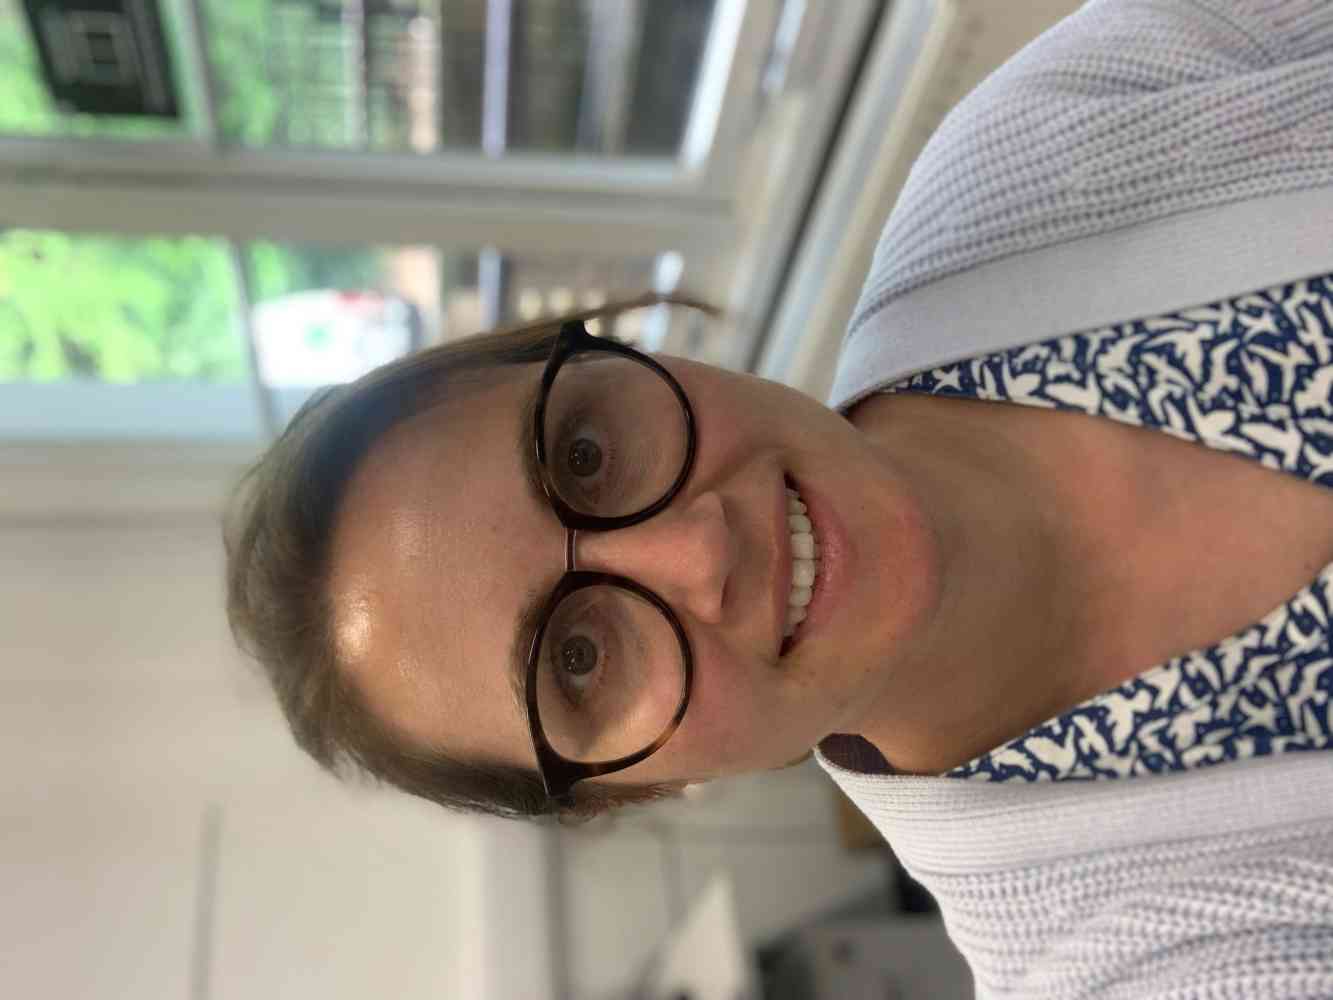 Emmeline Mudford - Midwifery Lecturer - Profile picture